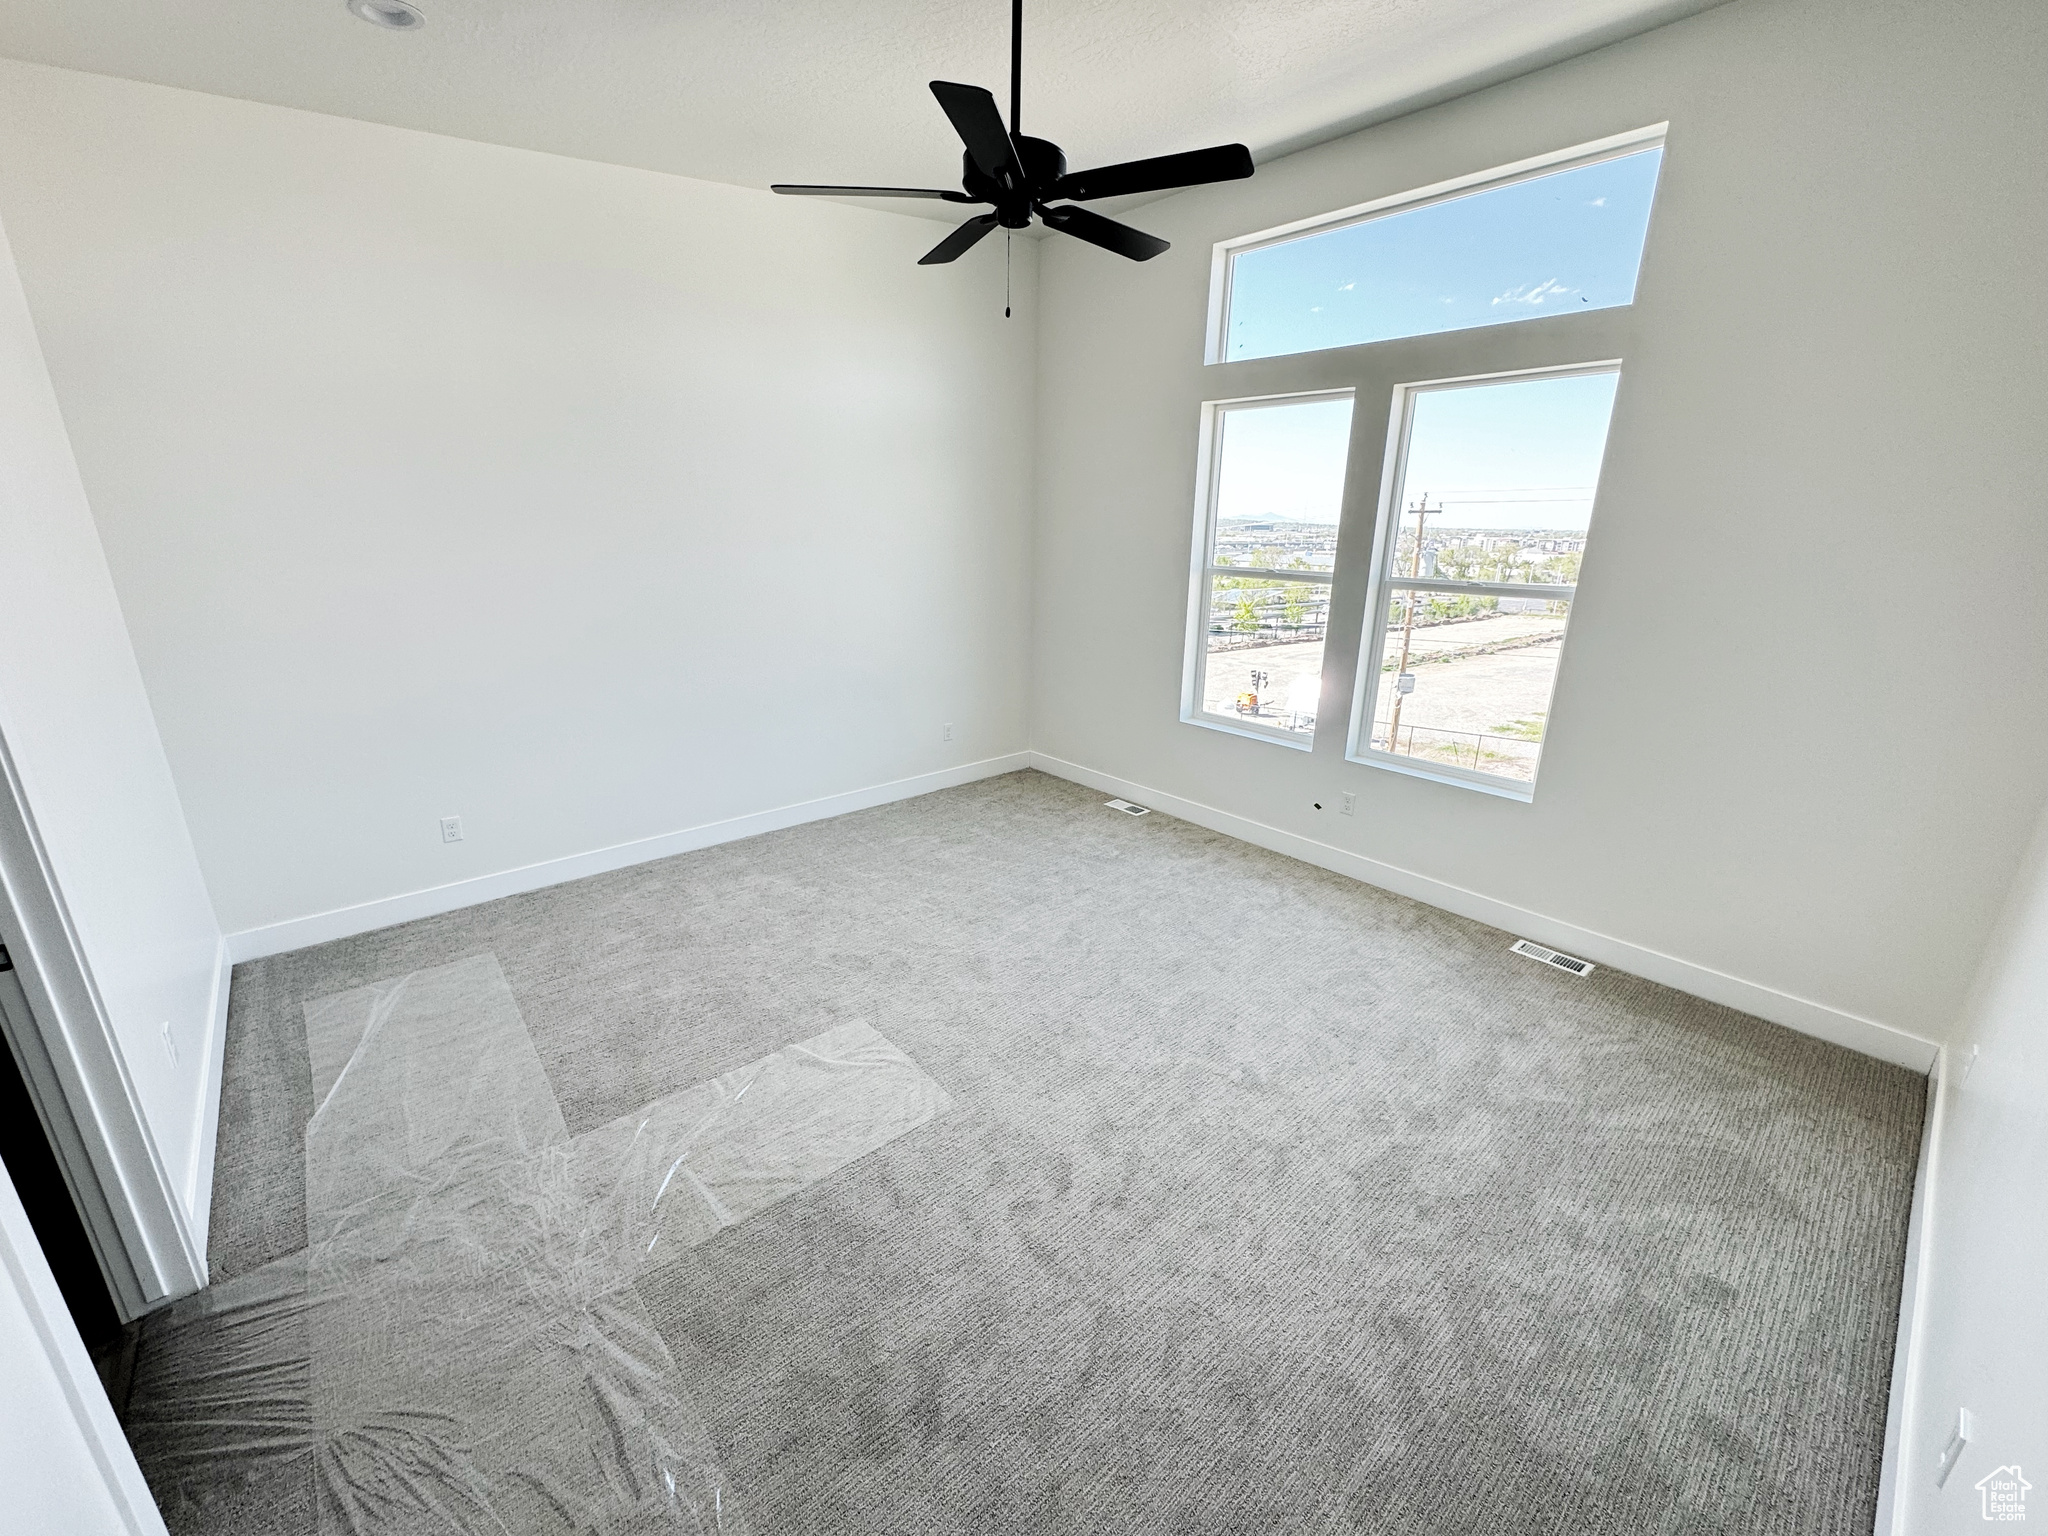 Master bedroom featuring ceiling fan and carpet flooring